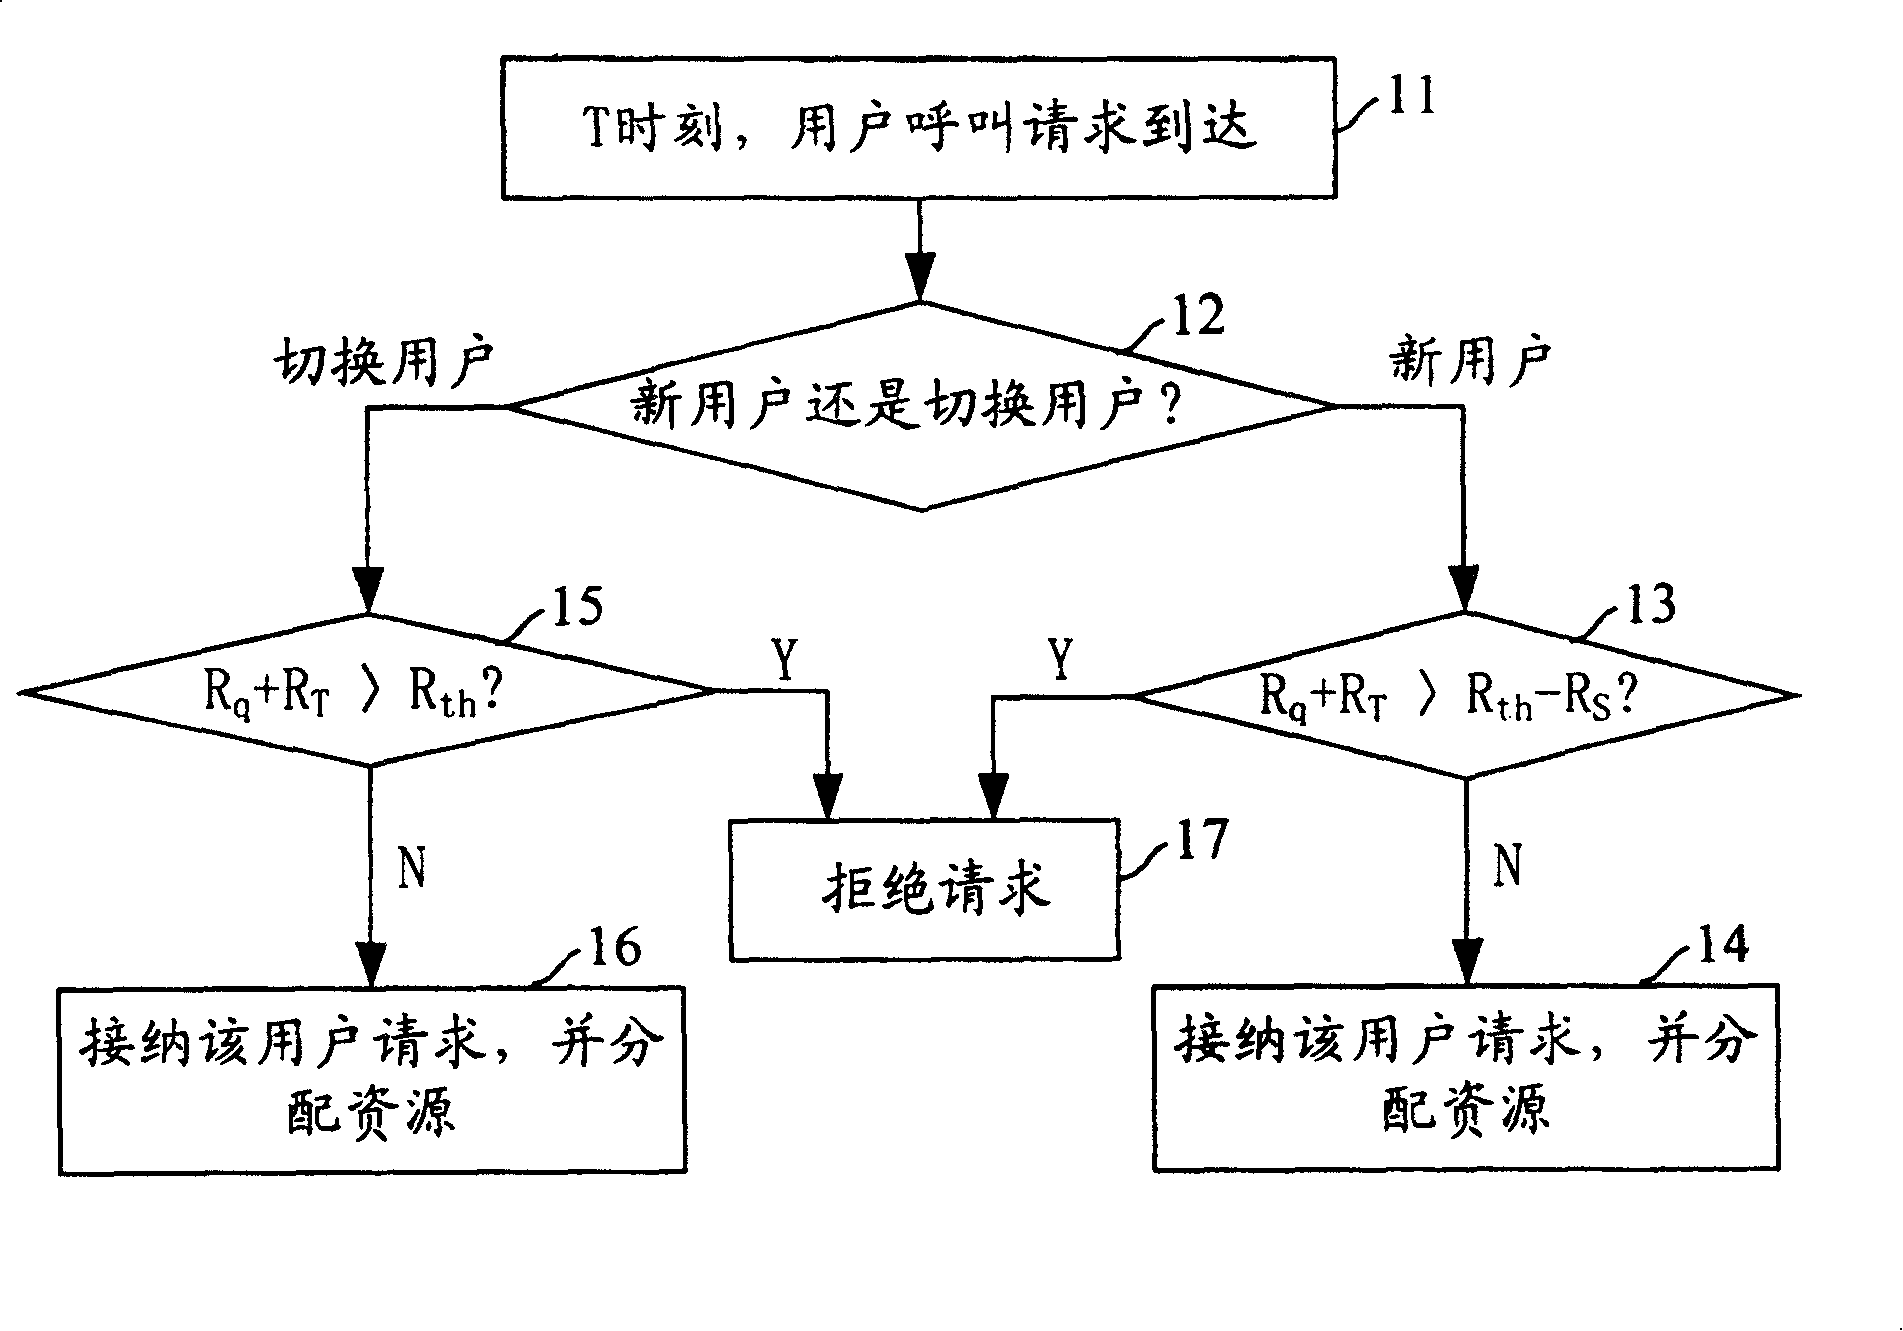 Implementation method for switching arranged resources in mobile communication system